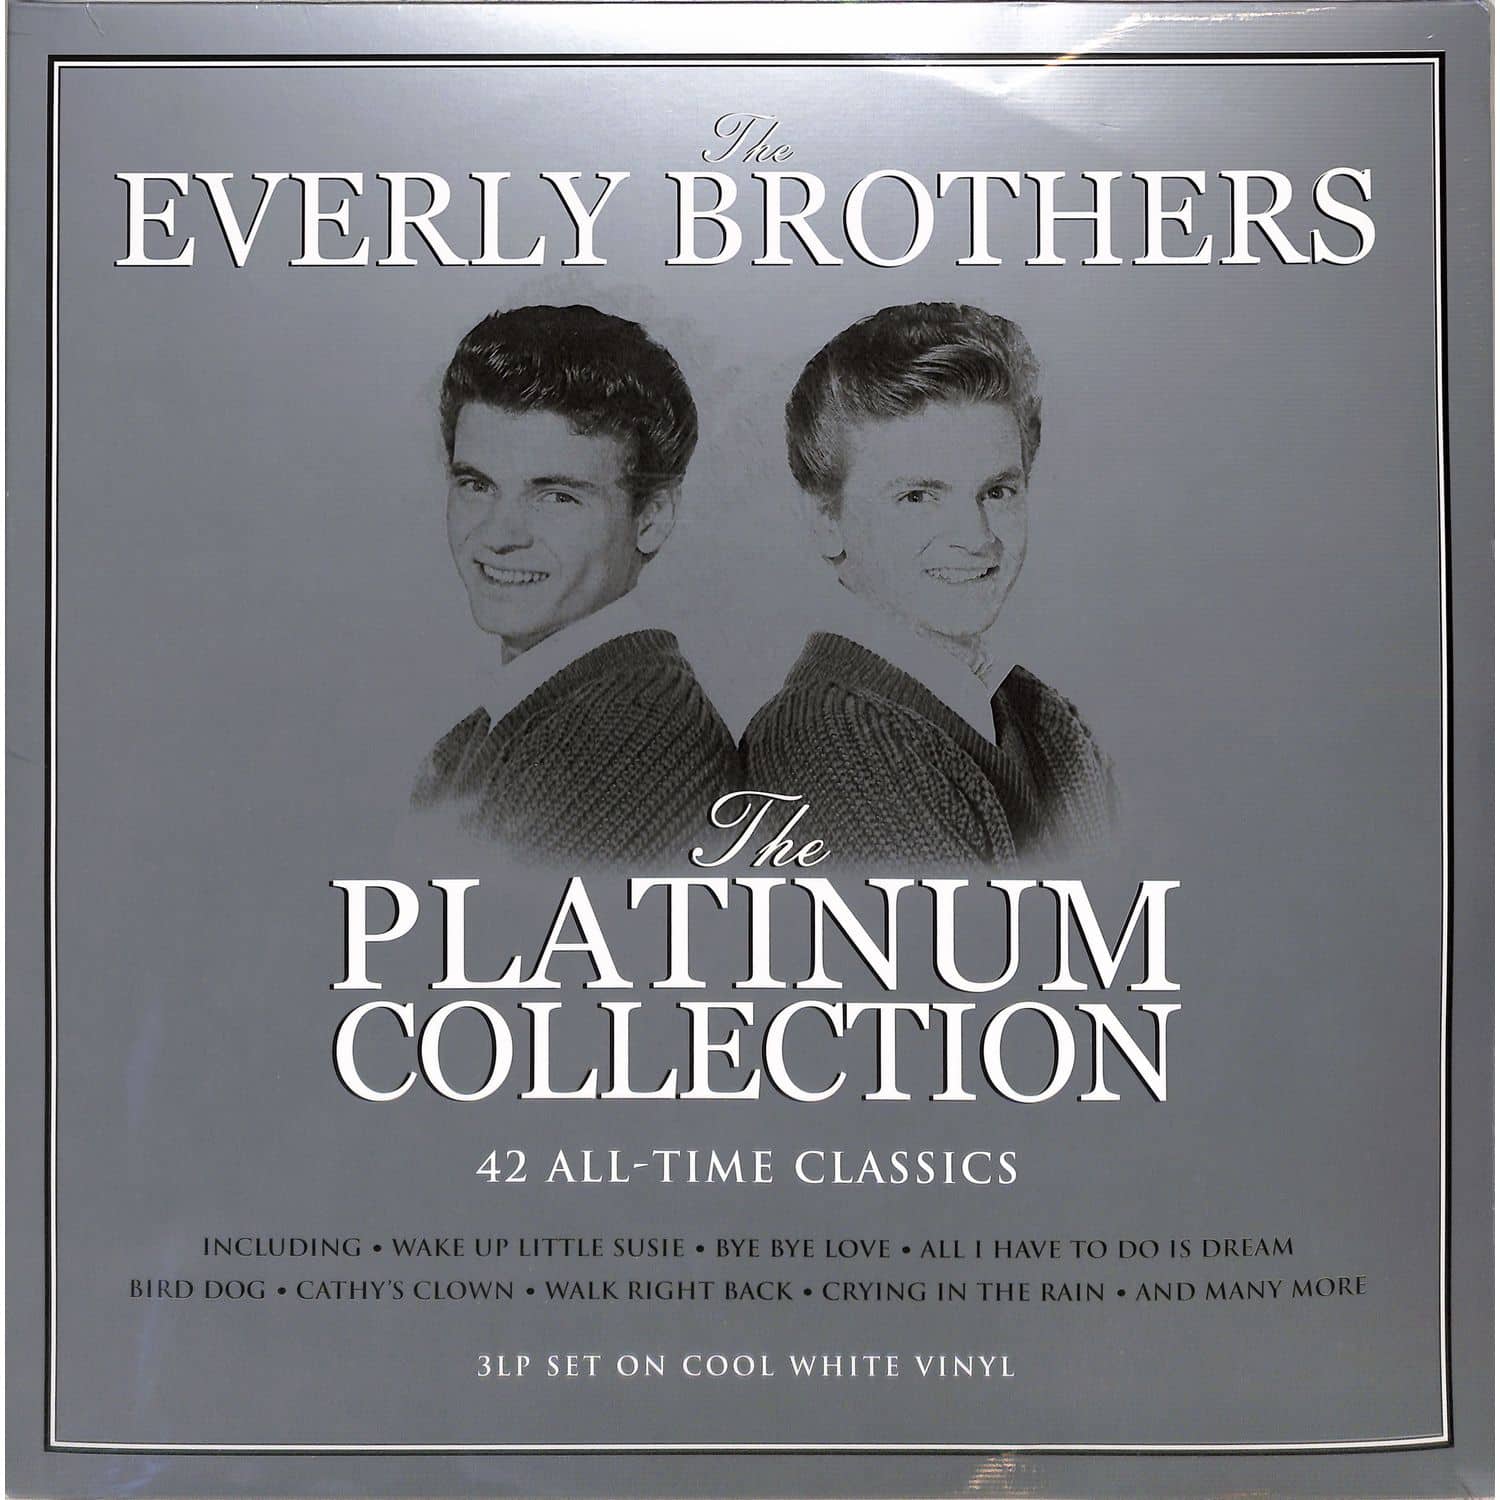 Everly Brothers - PLATINUM COLLECTION 